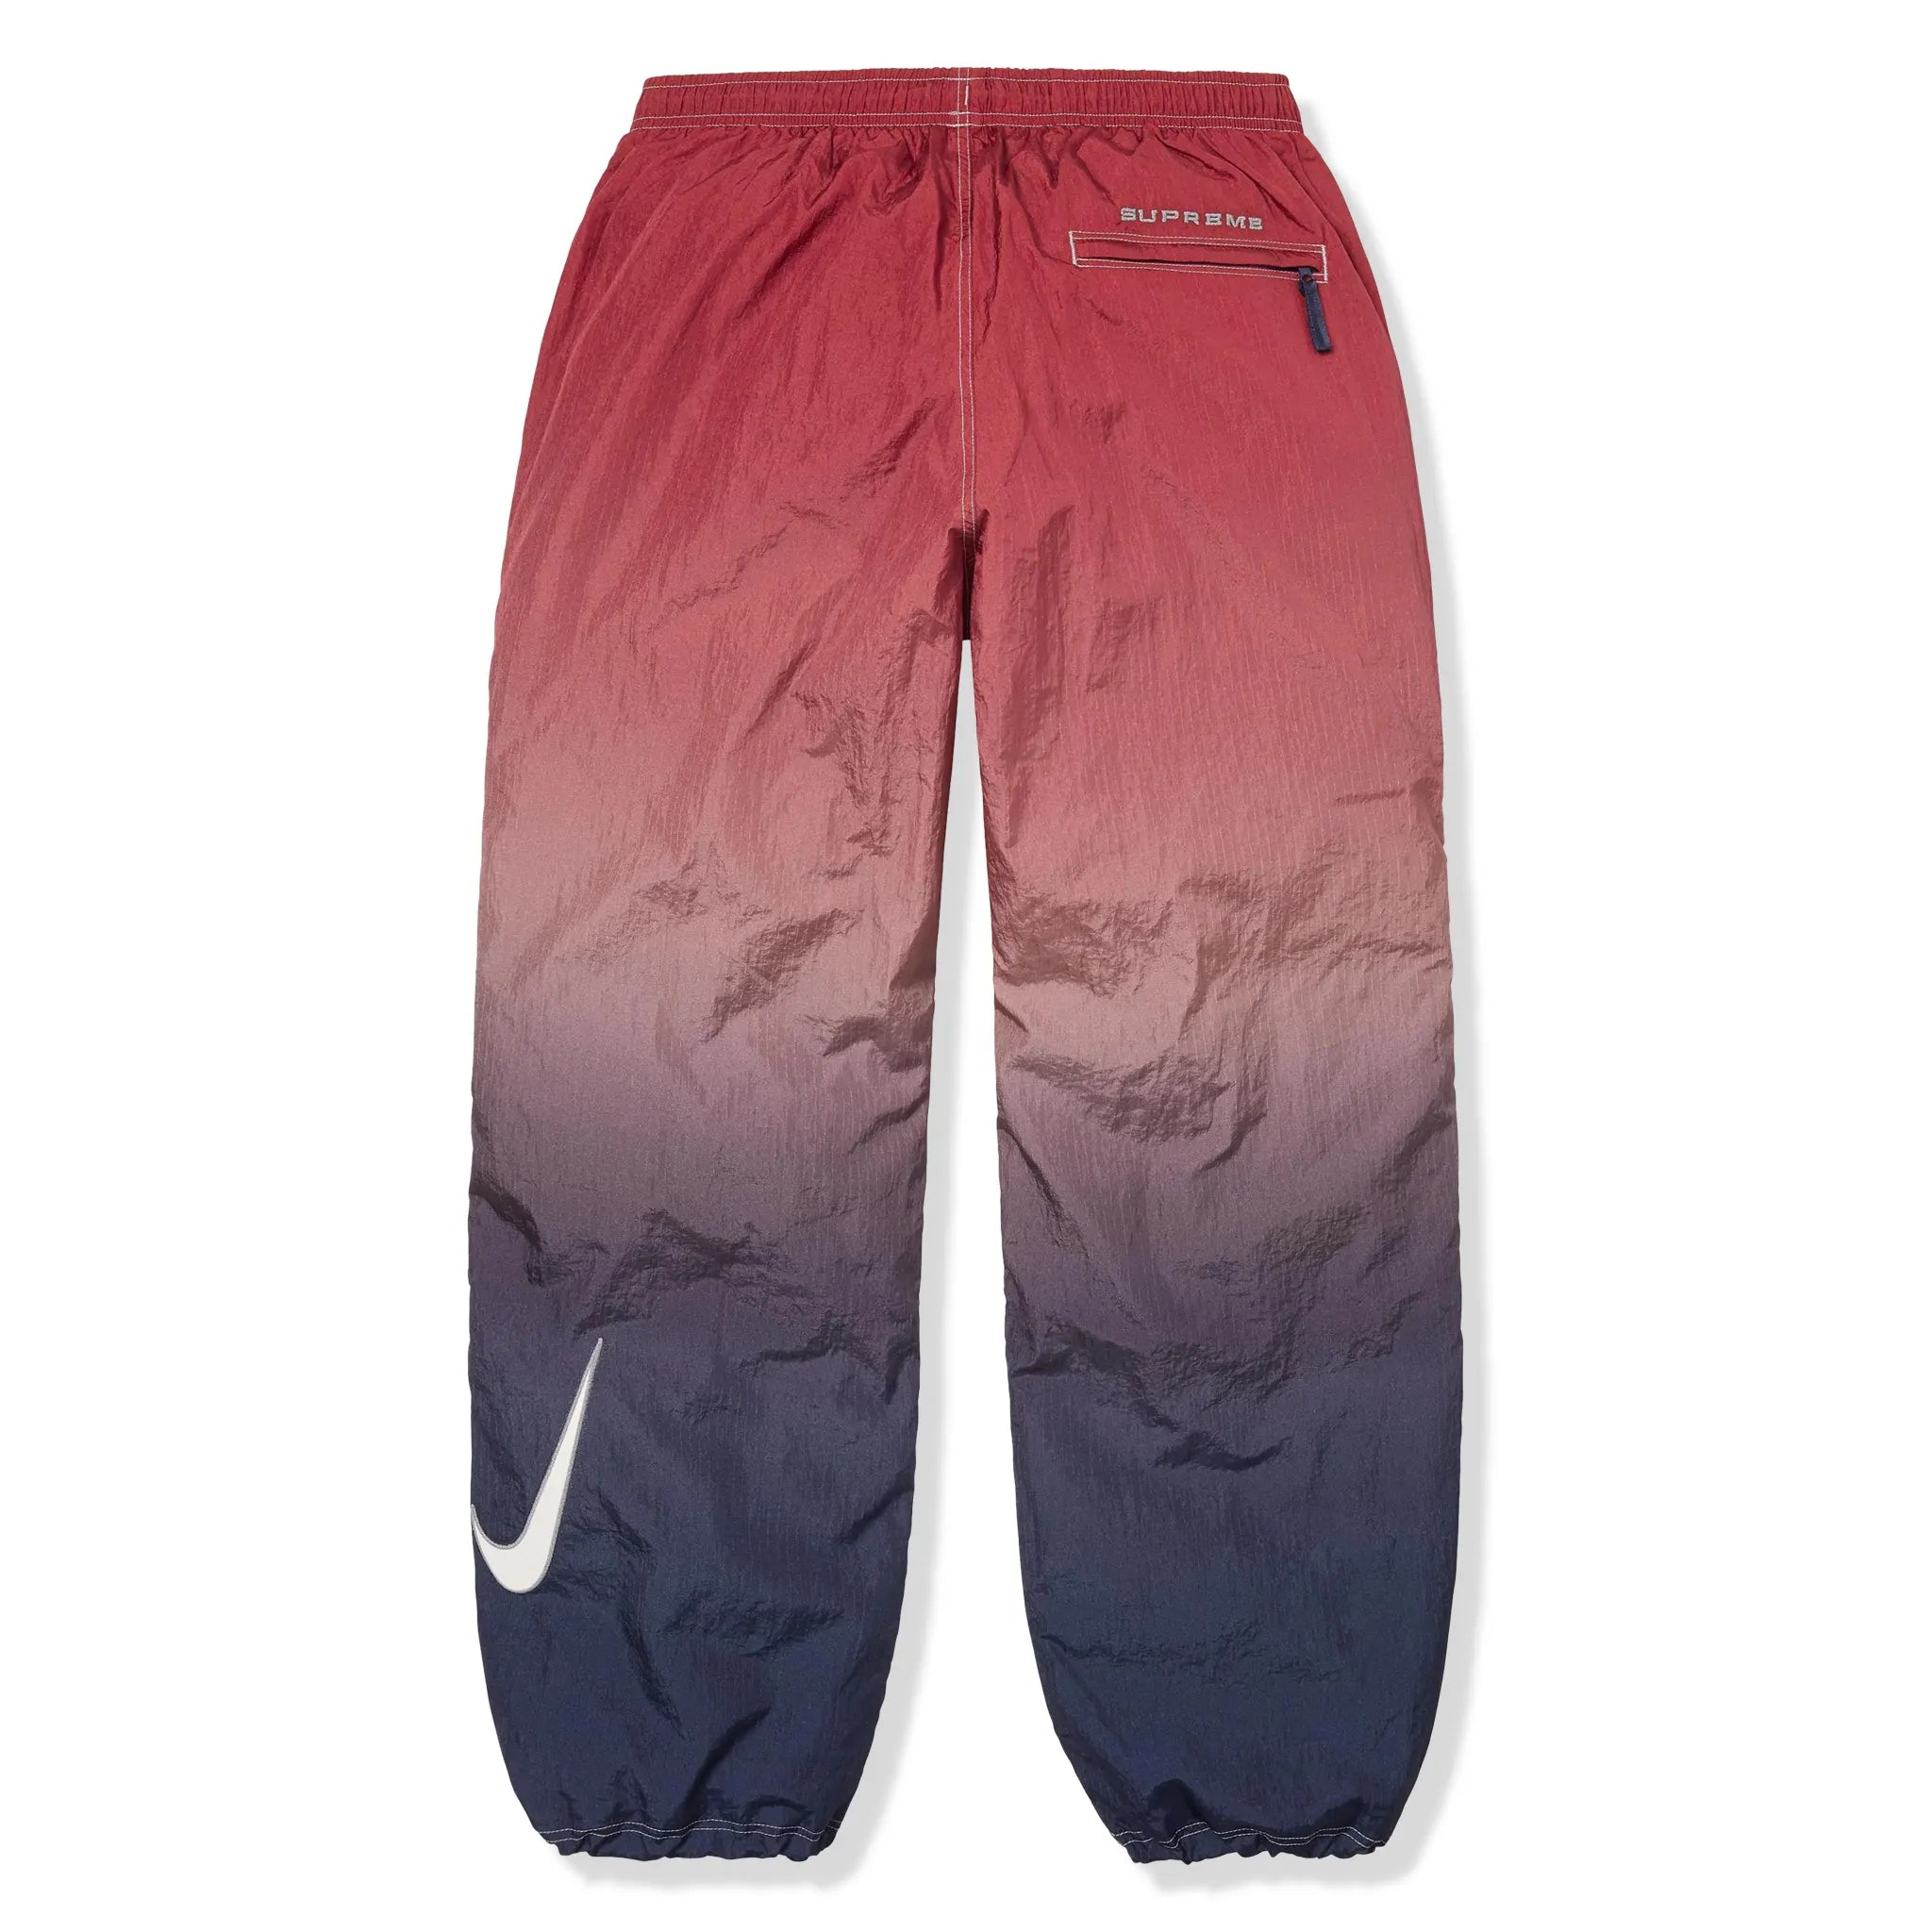 Back view of Nike Supreme Ripstop Multi Color Track Pants